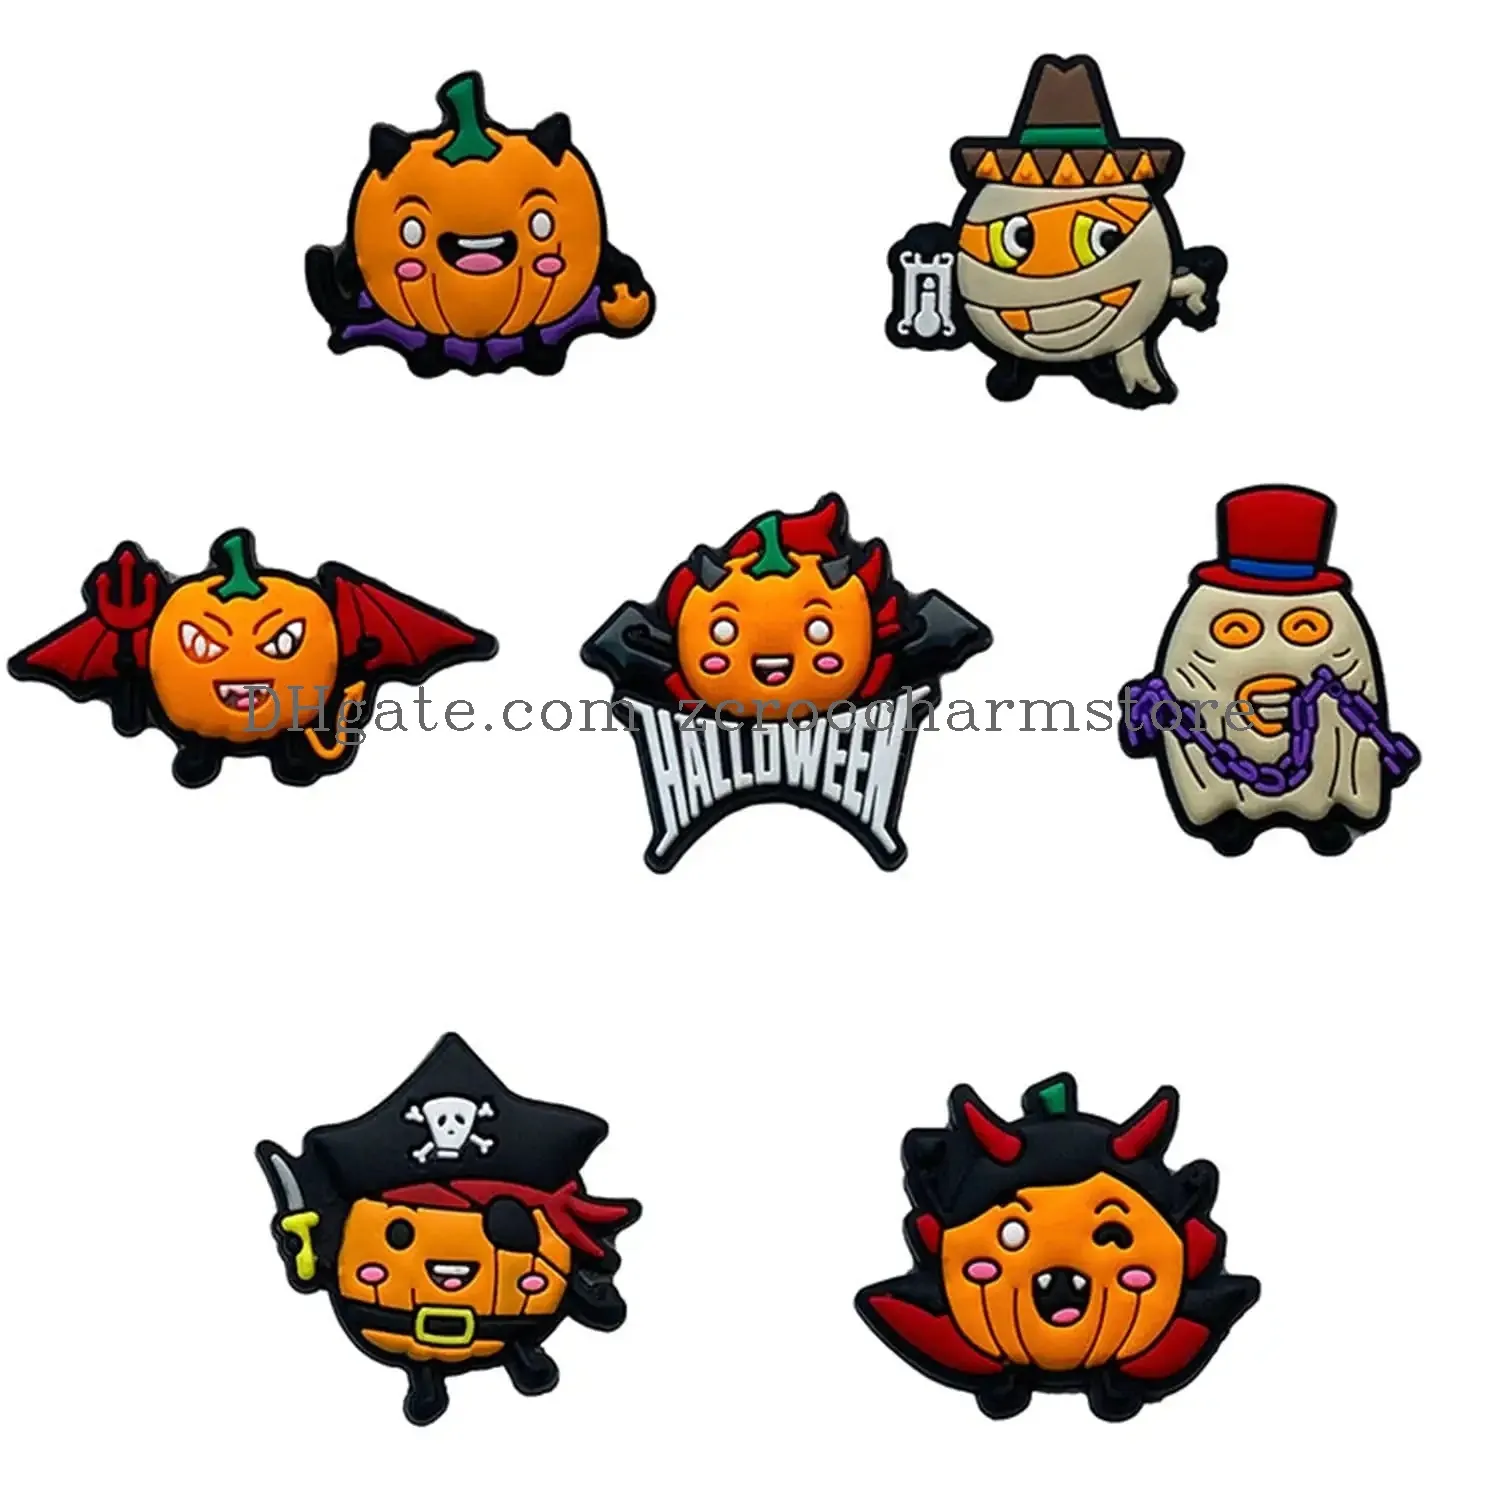  3ml skull pumpkin croc shoe decoration charms halloween horror shoe accessories for kid boy and girl adult women men party favor gifts